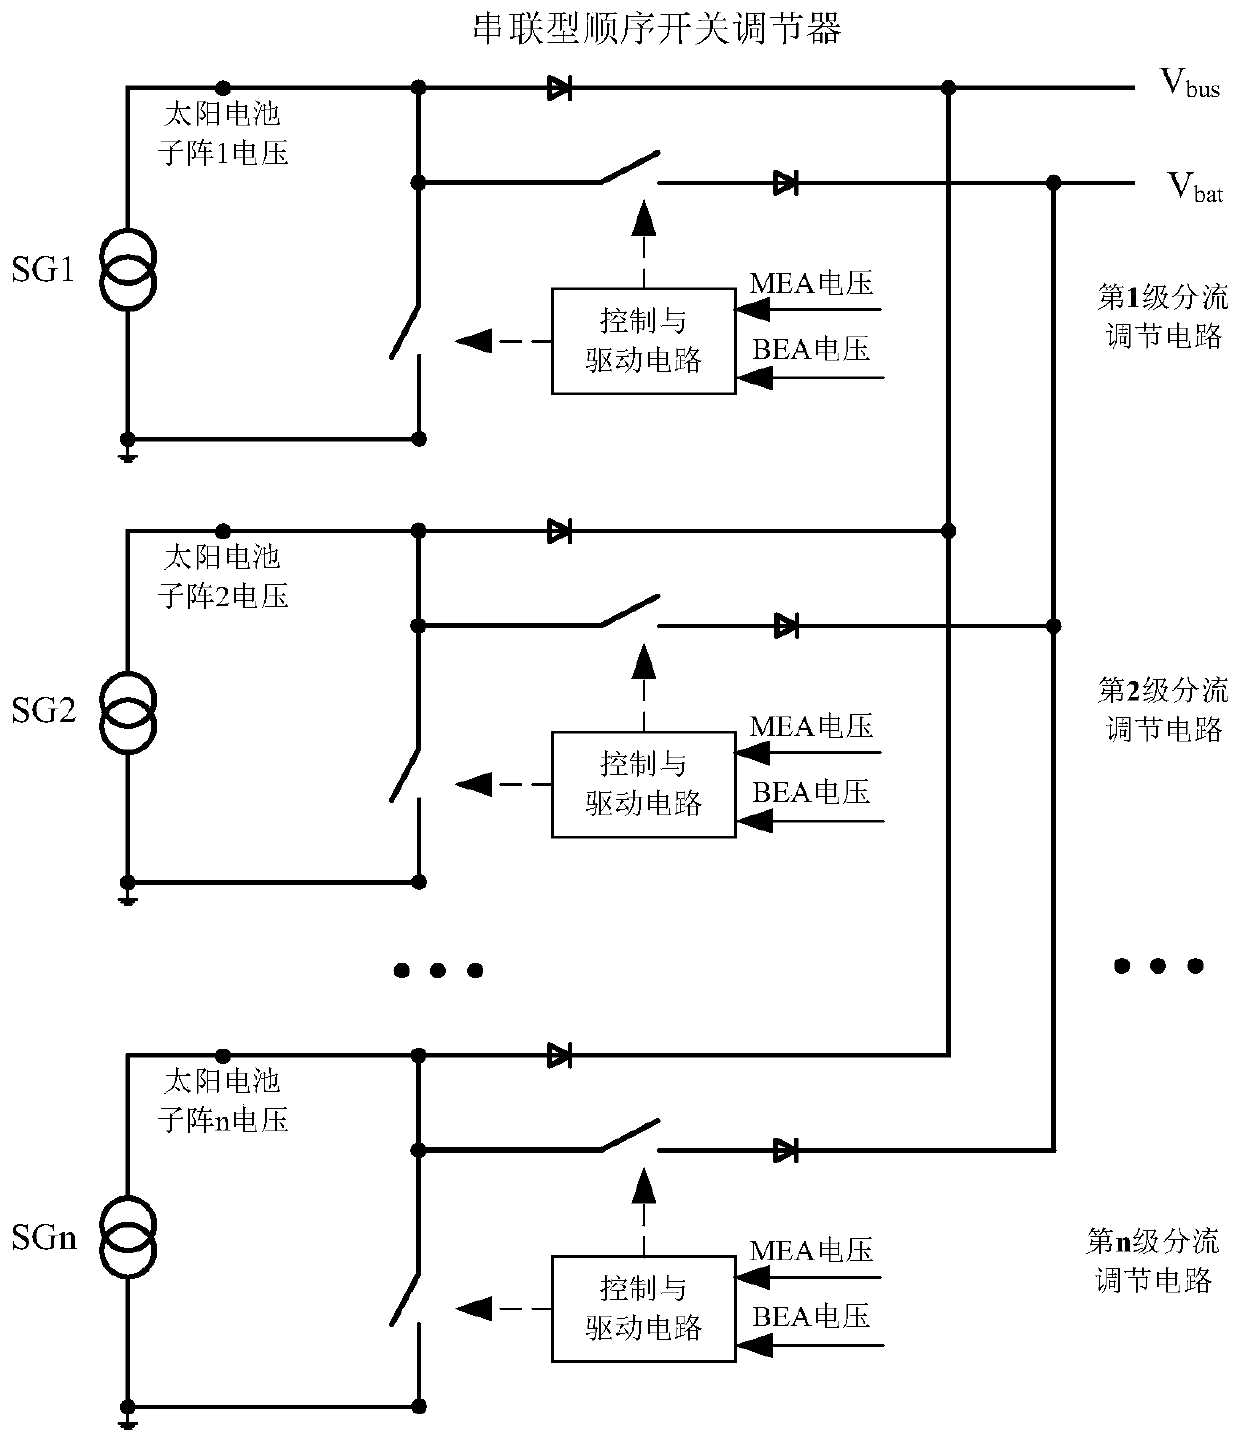 Fault diagnosis method of S4R serial-connection type sequence switch shunt regulator